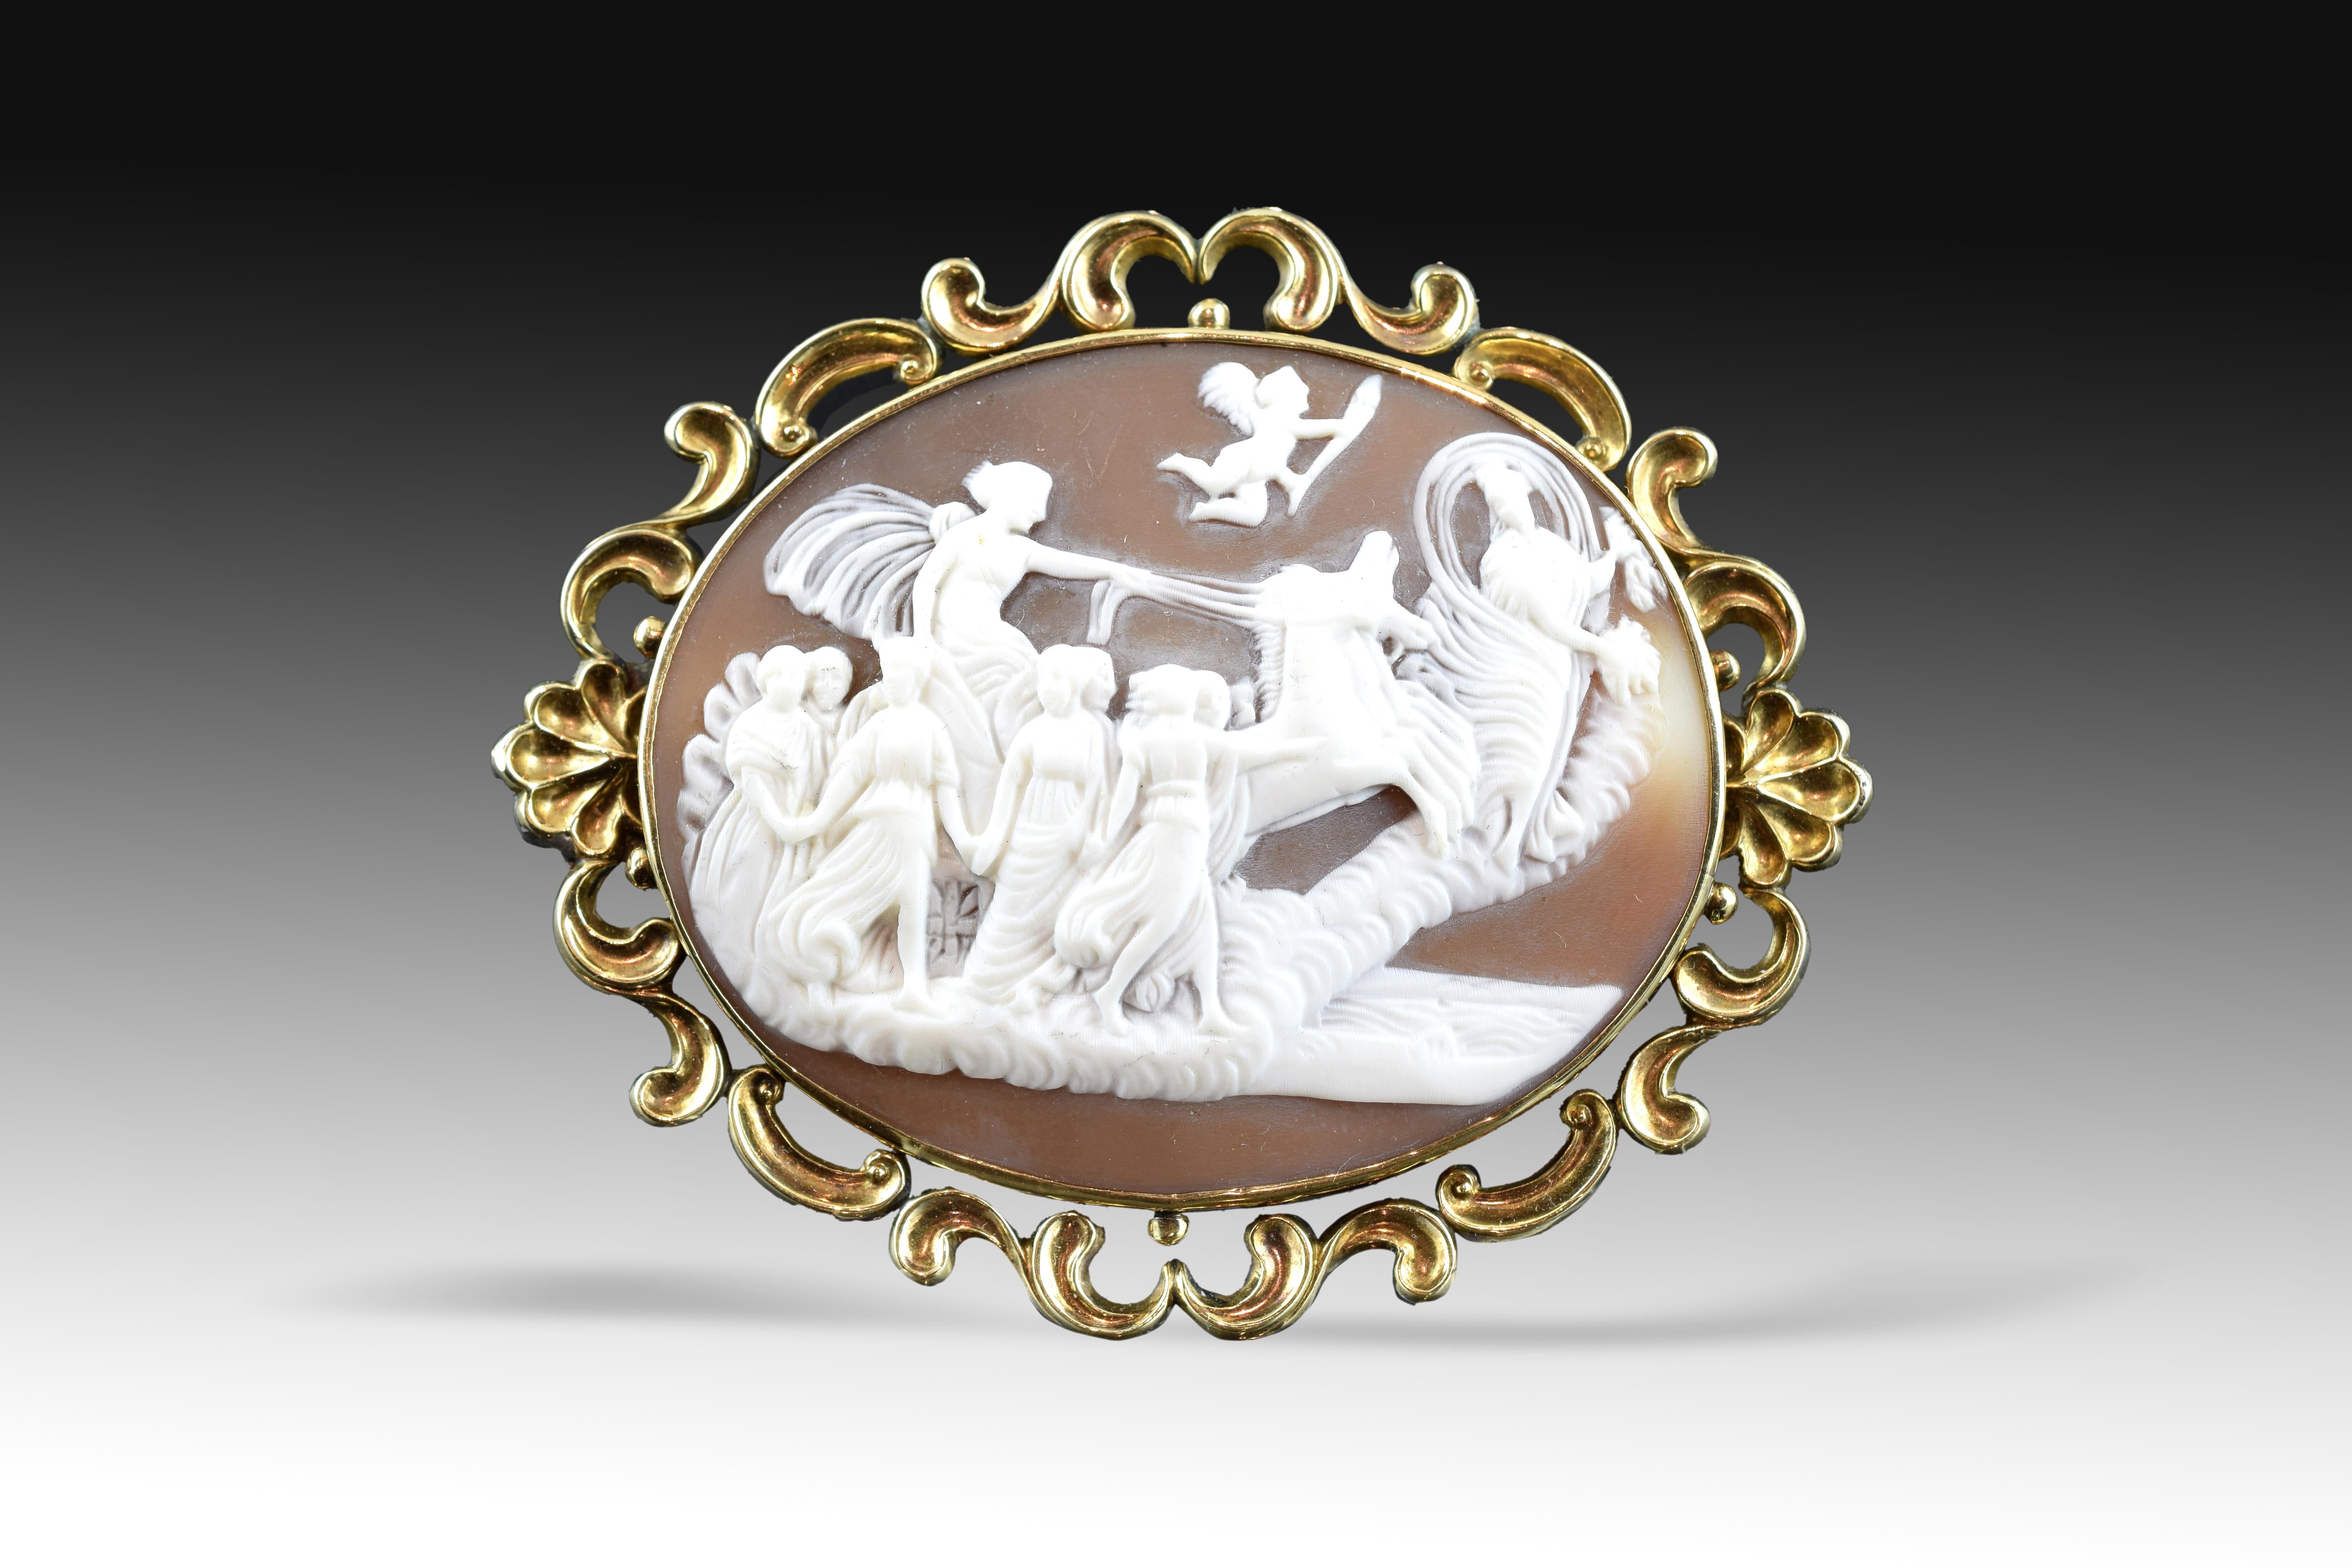 Cameo with frame stamped openwork gold (9-karat) decorated with a symmetrical composition based on opposing 